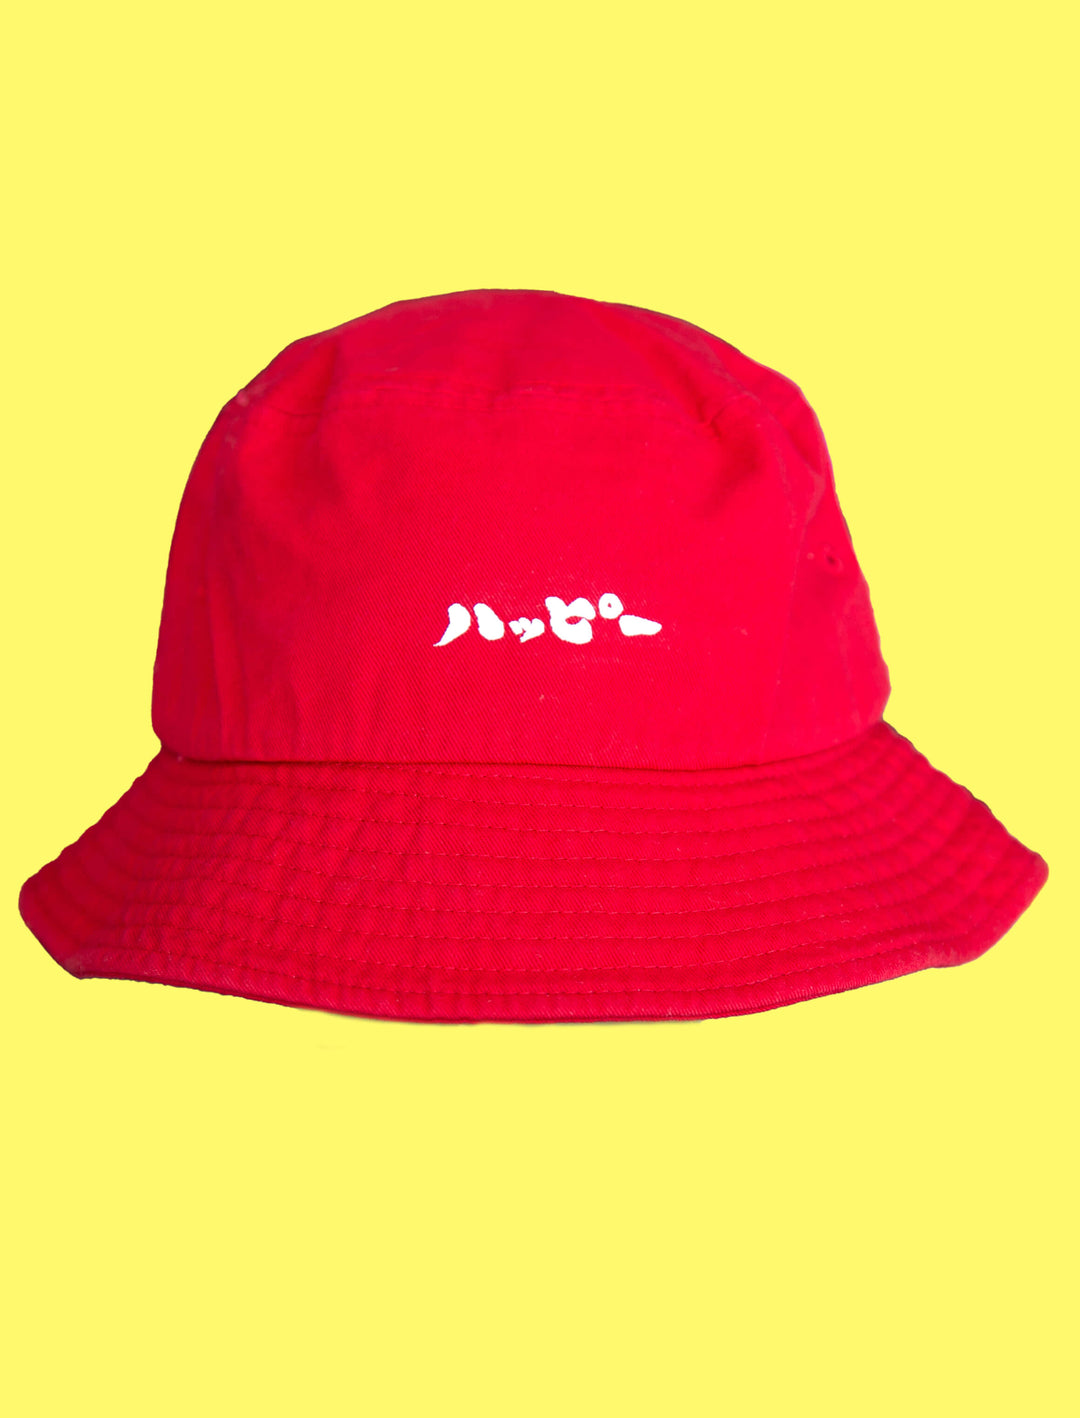 Red bucket hat with the word happy in Japanese katakana on it.